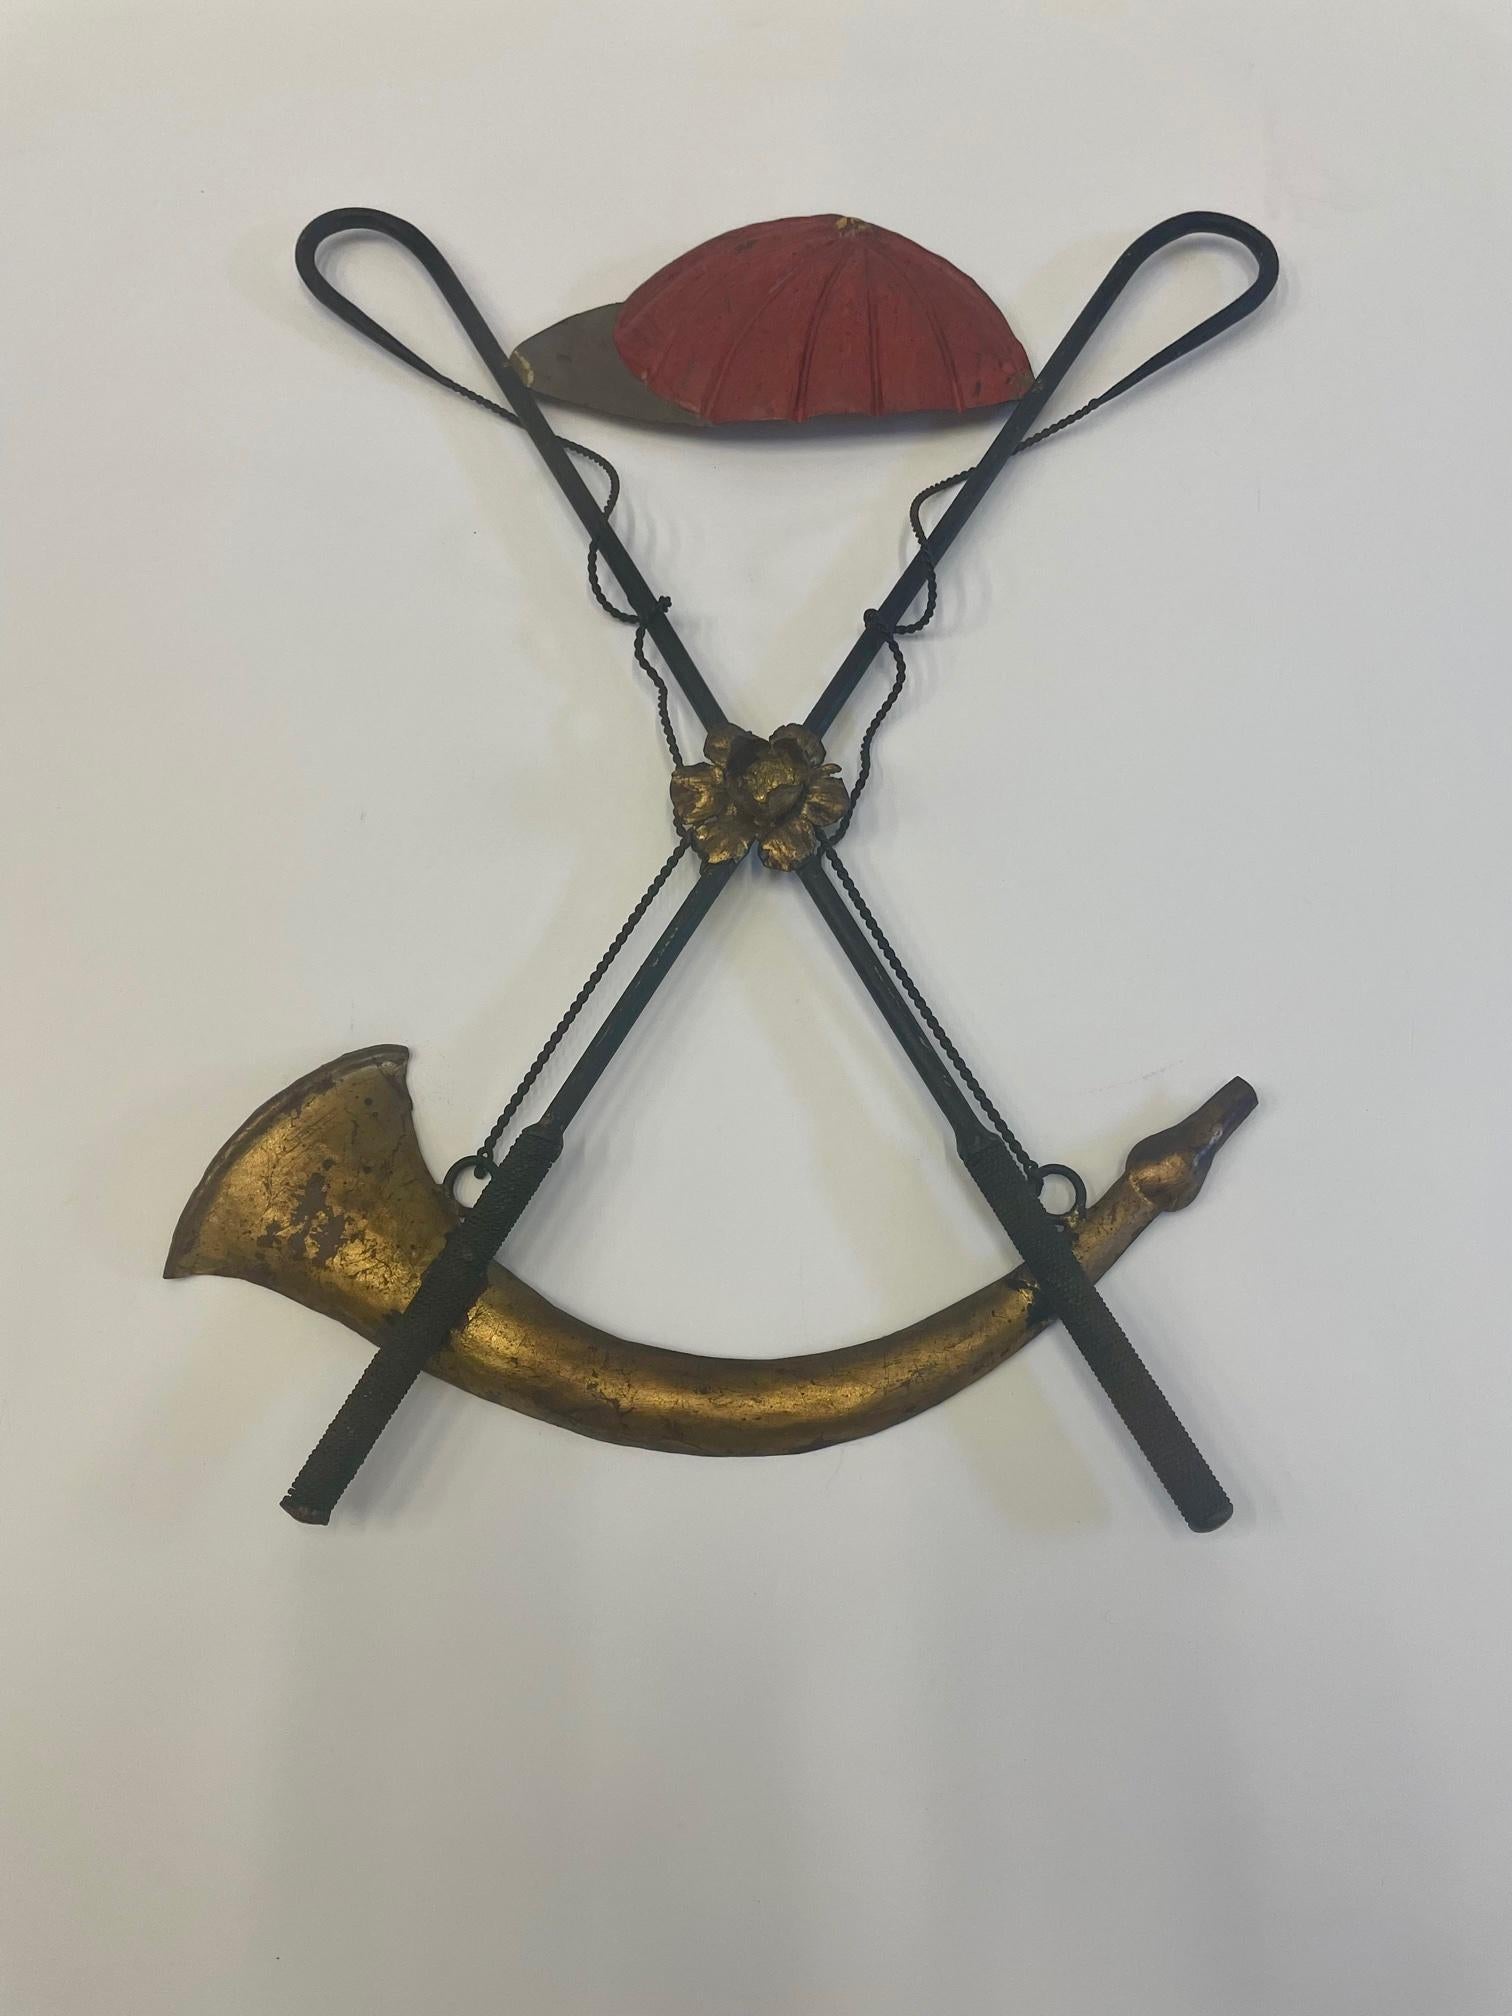 A rare and special iron wall sculpture with equestrian motif having red painted jockey hat, criss crossed rider's crops and a perfectly situated gilded crescent shaped horn adorning the bottom.